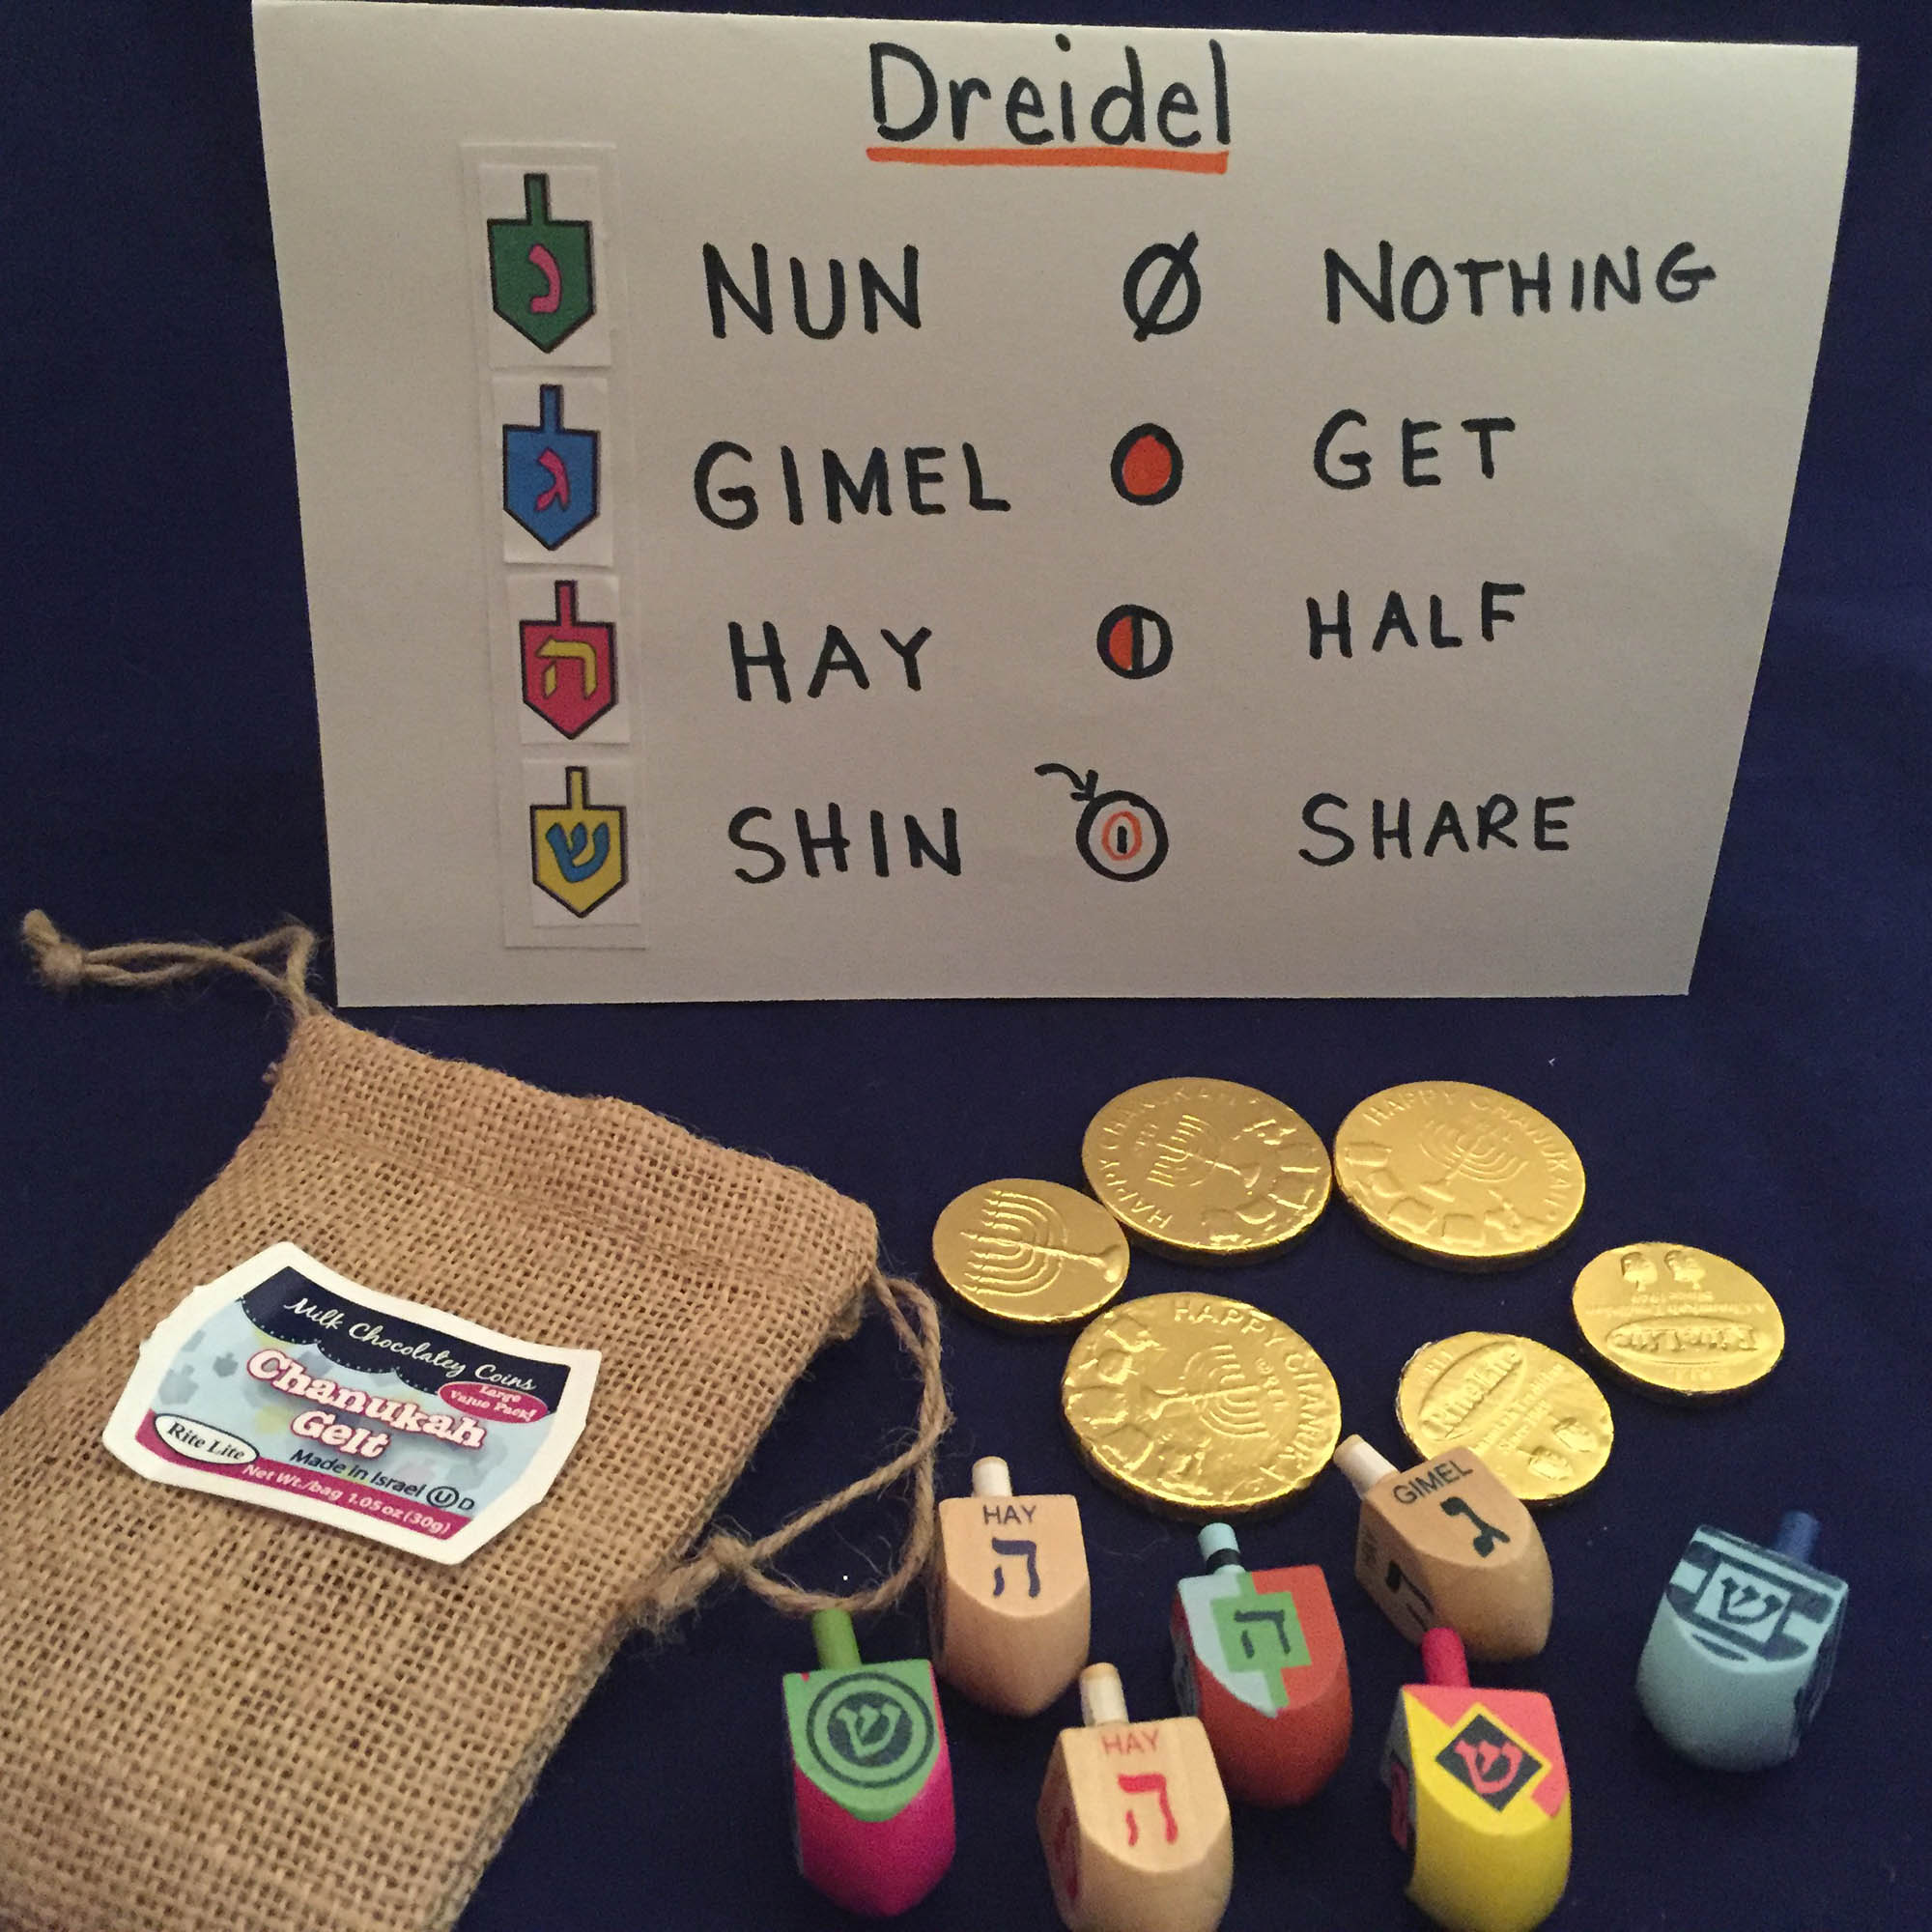 Dreidel Game Rules Printable How to Play Dreidel My Jewish Learning